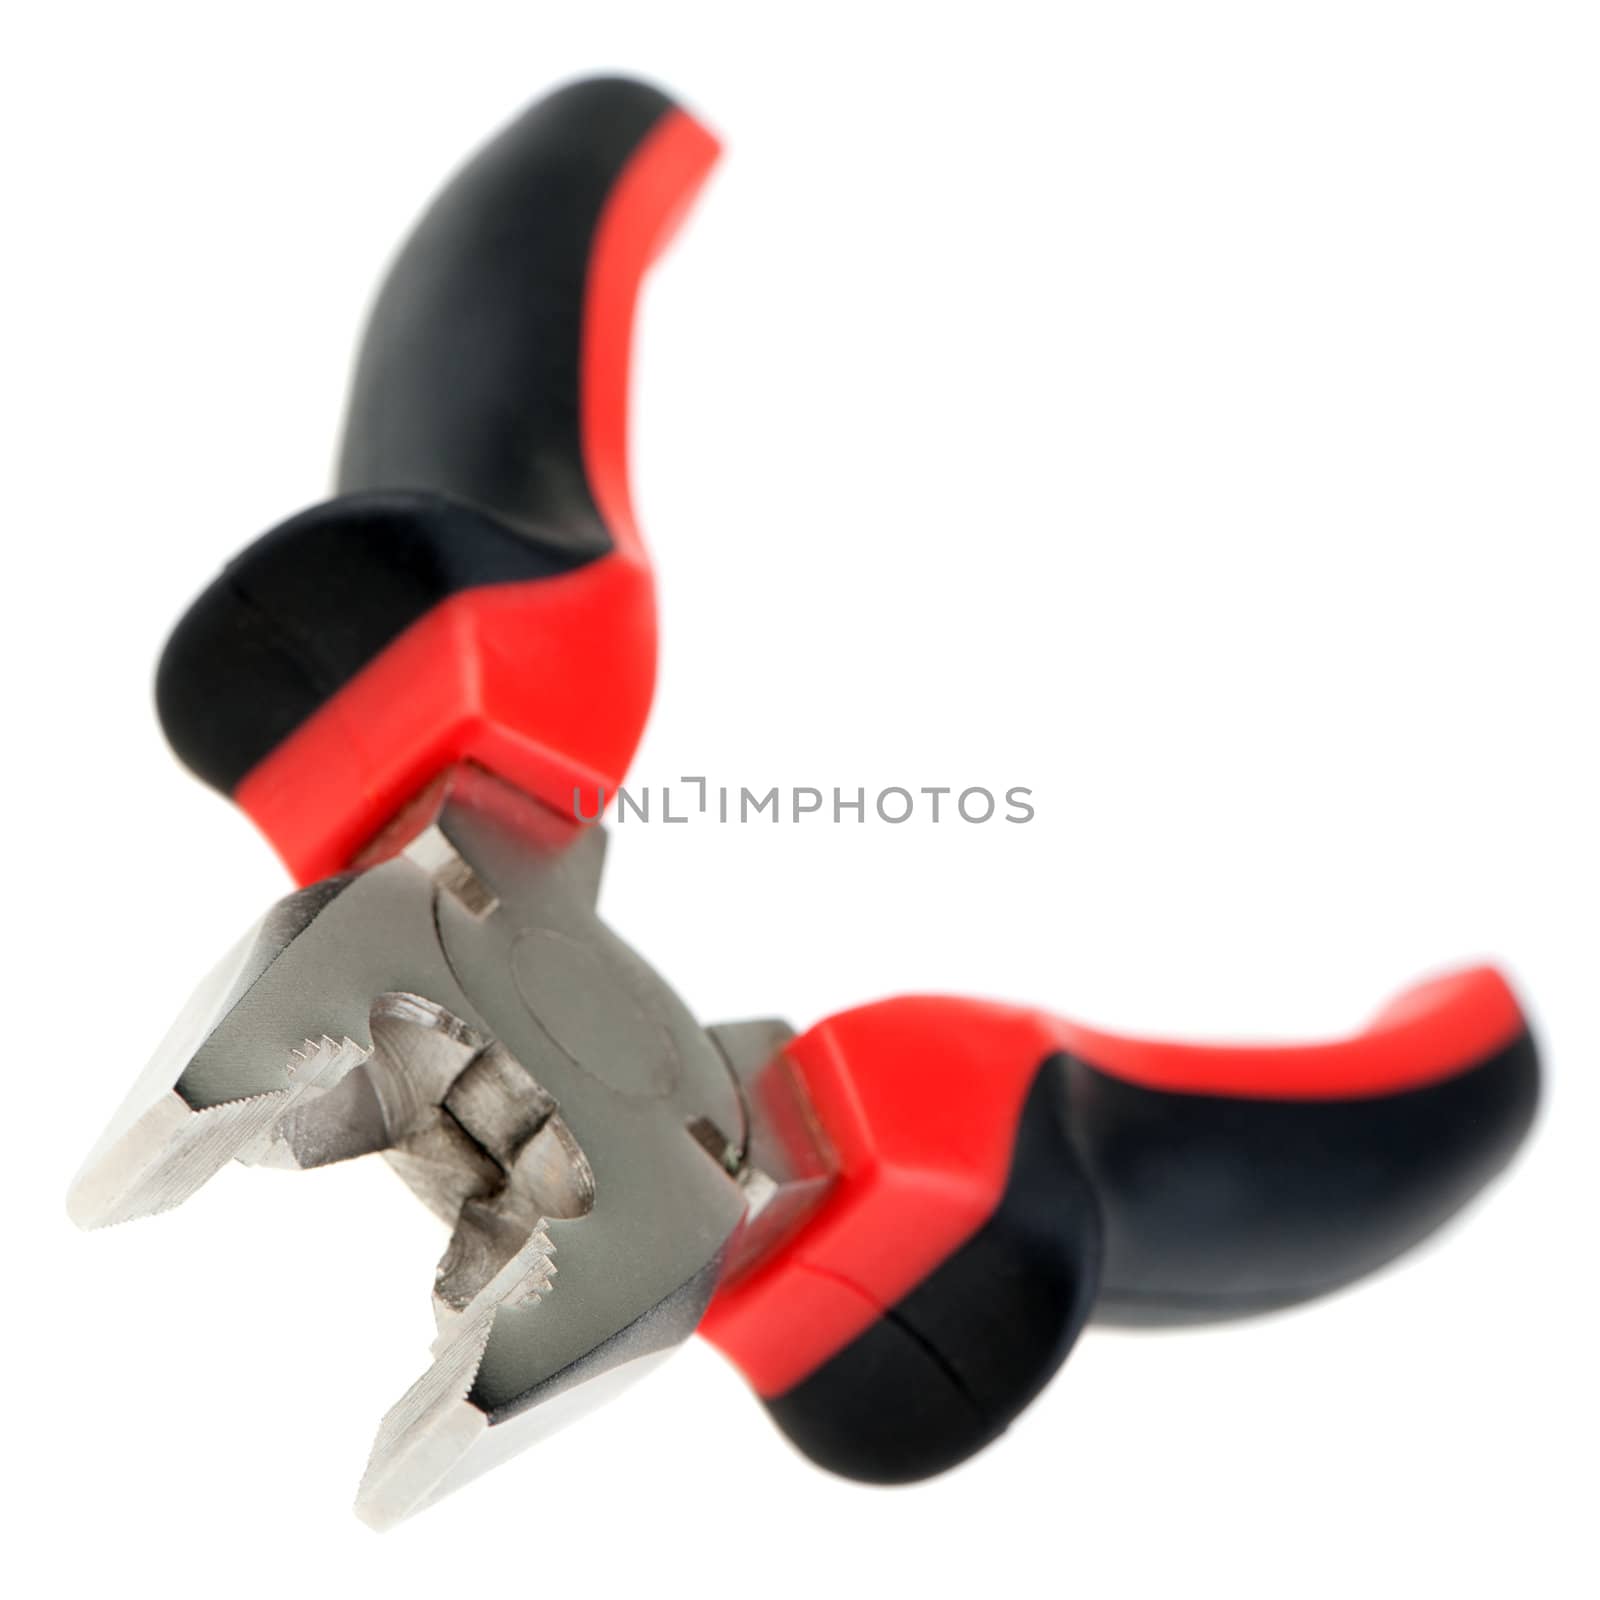 Pliers. The manual tool. Isolated on white background